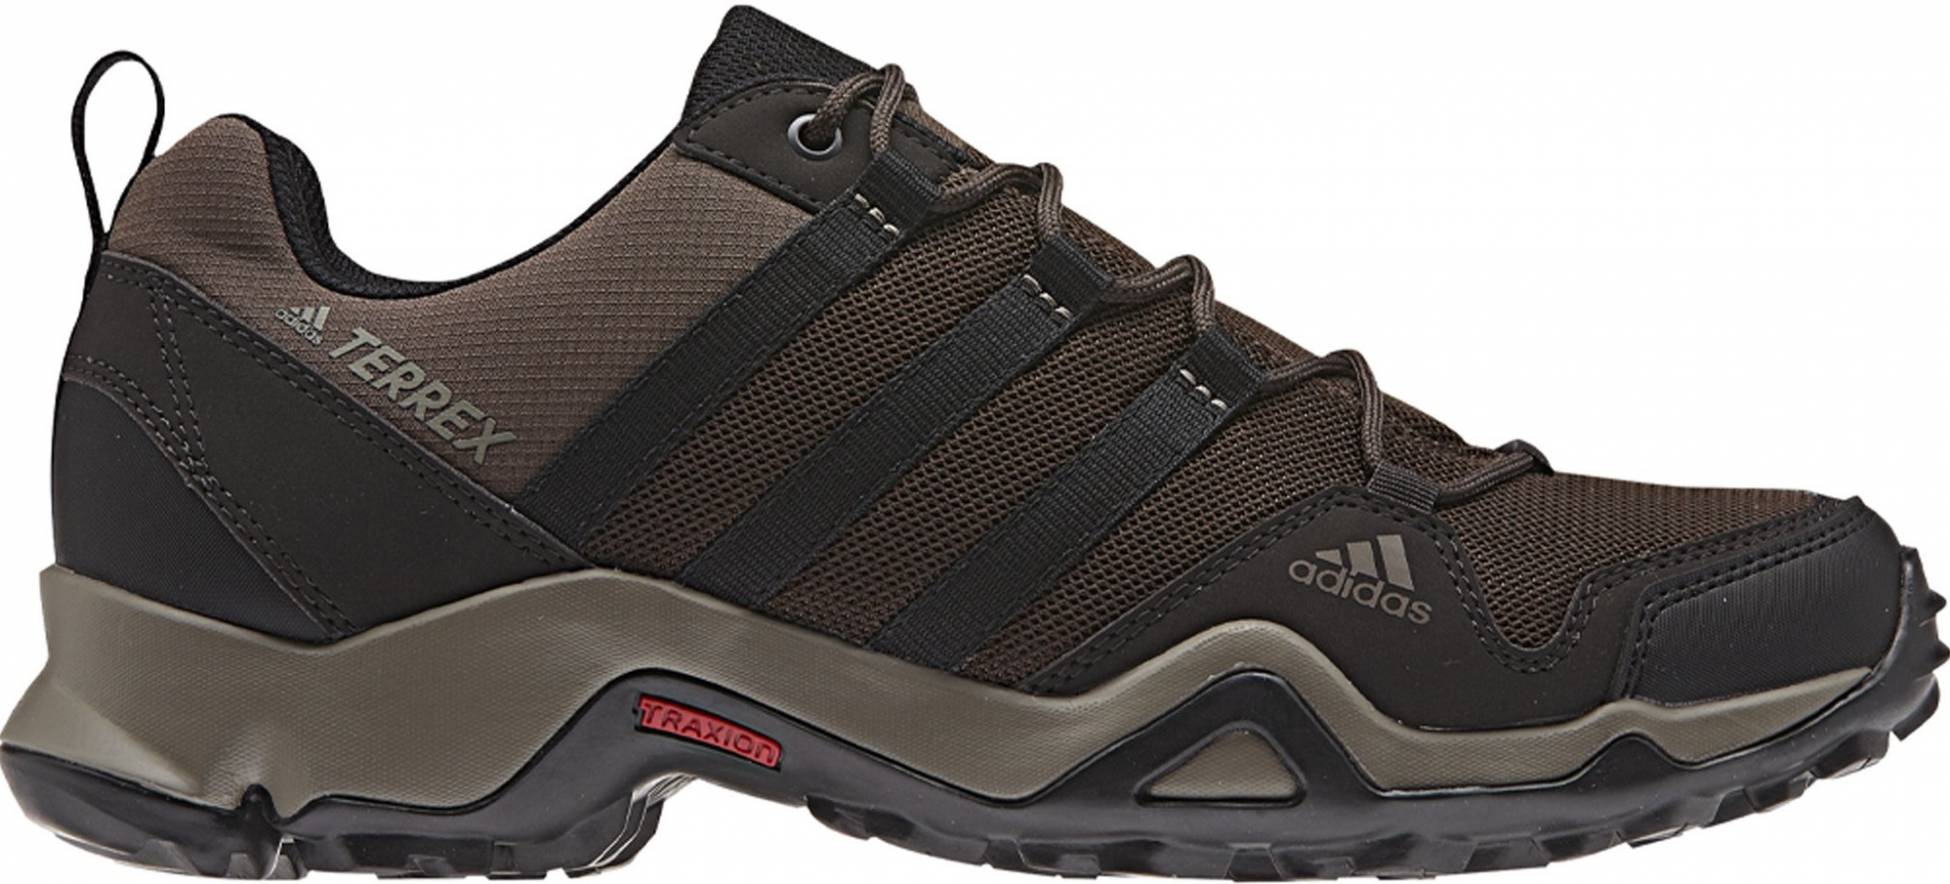 Only $70 + Review of Adidas Terrex AX2R | RunRepeat